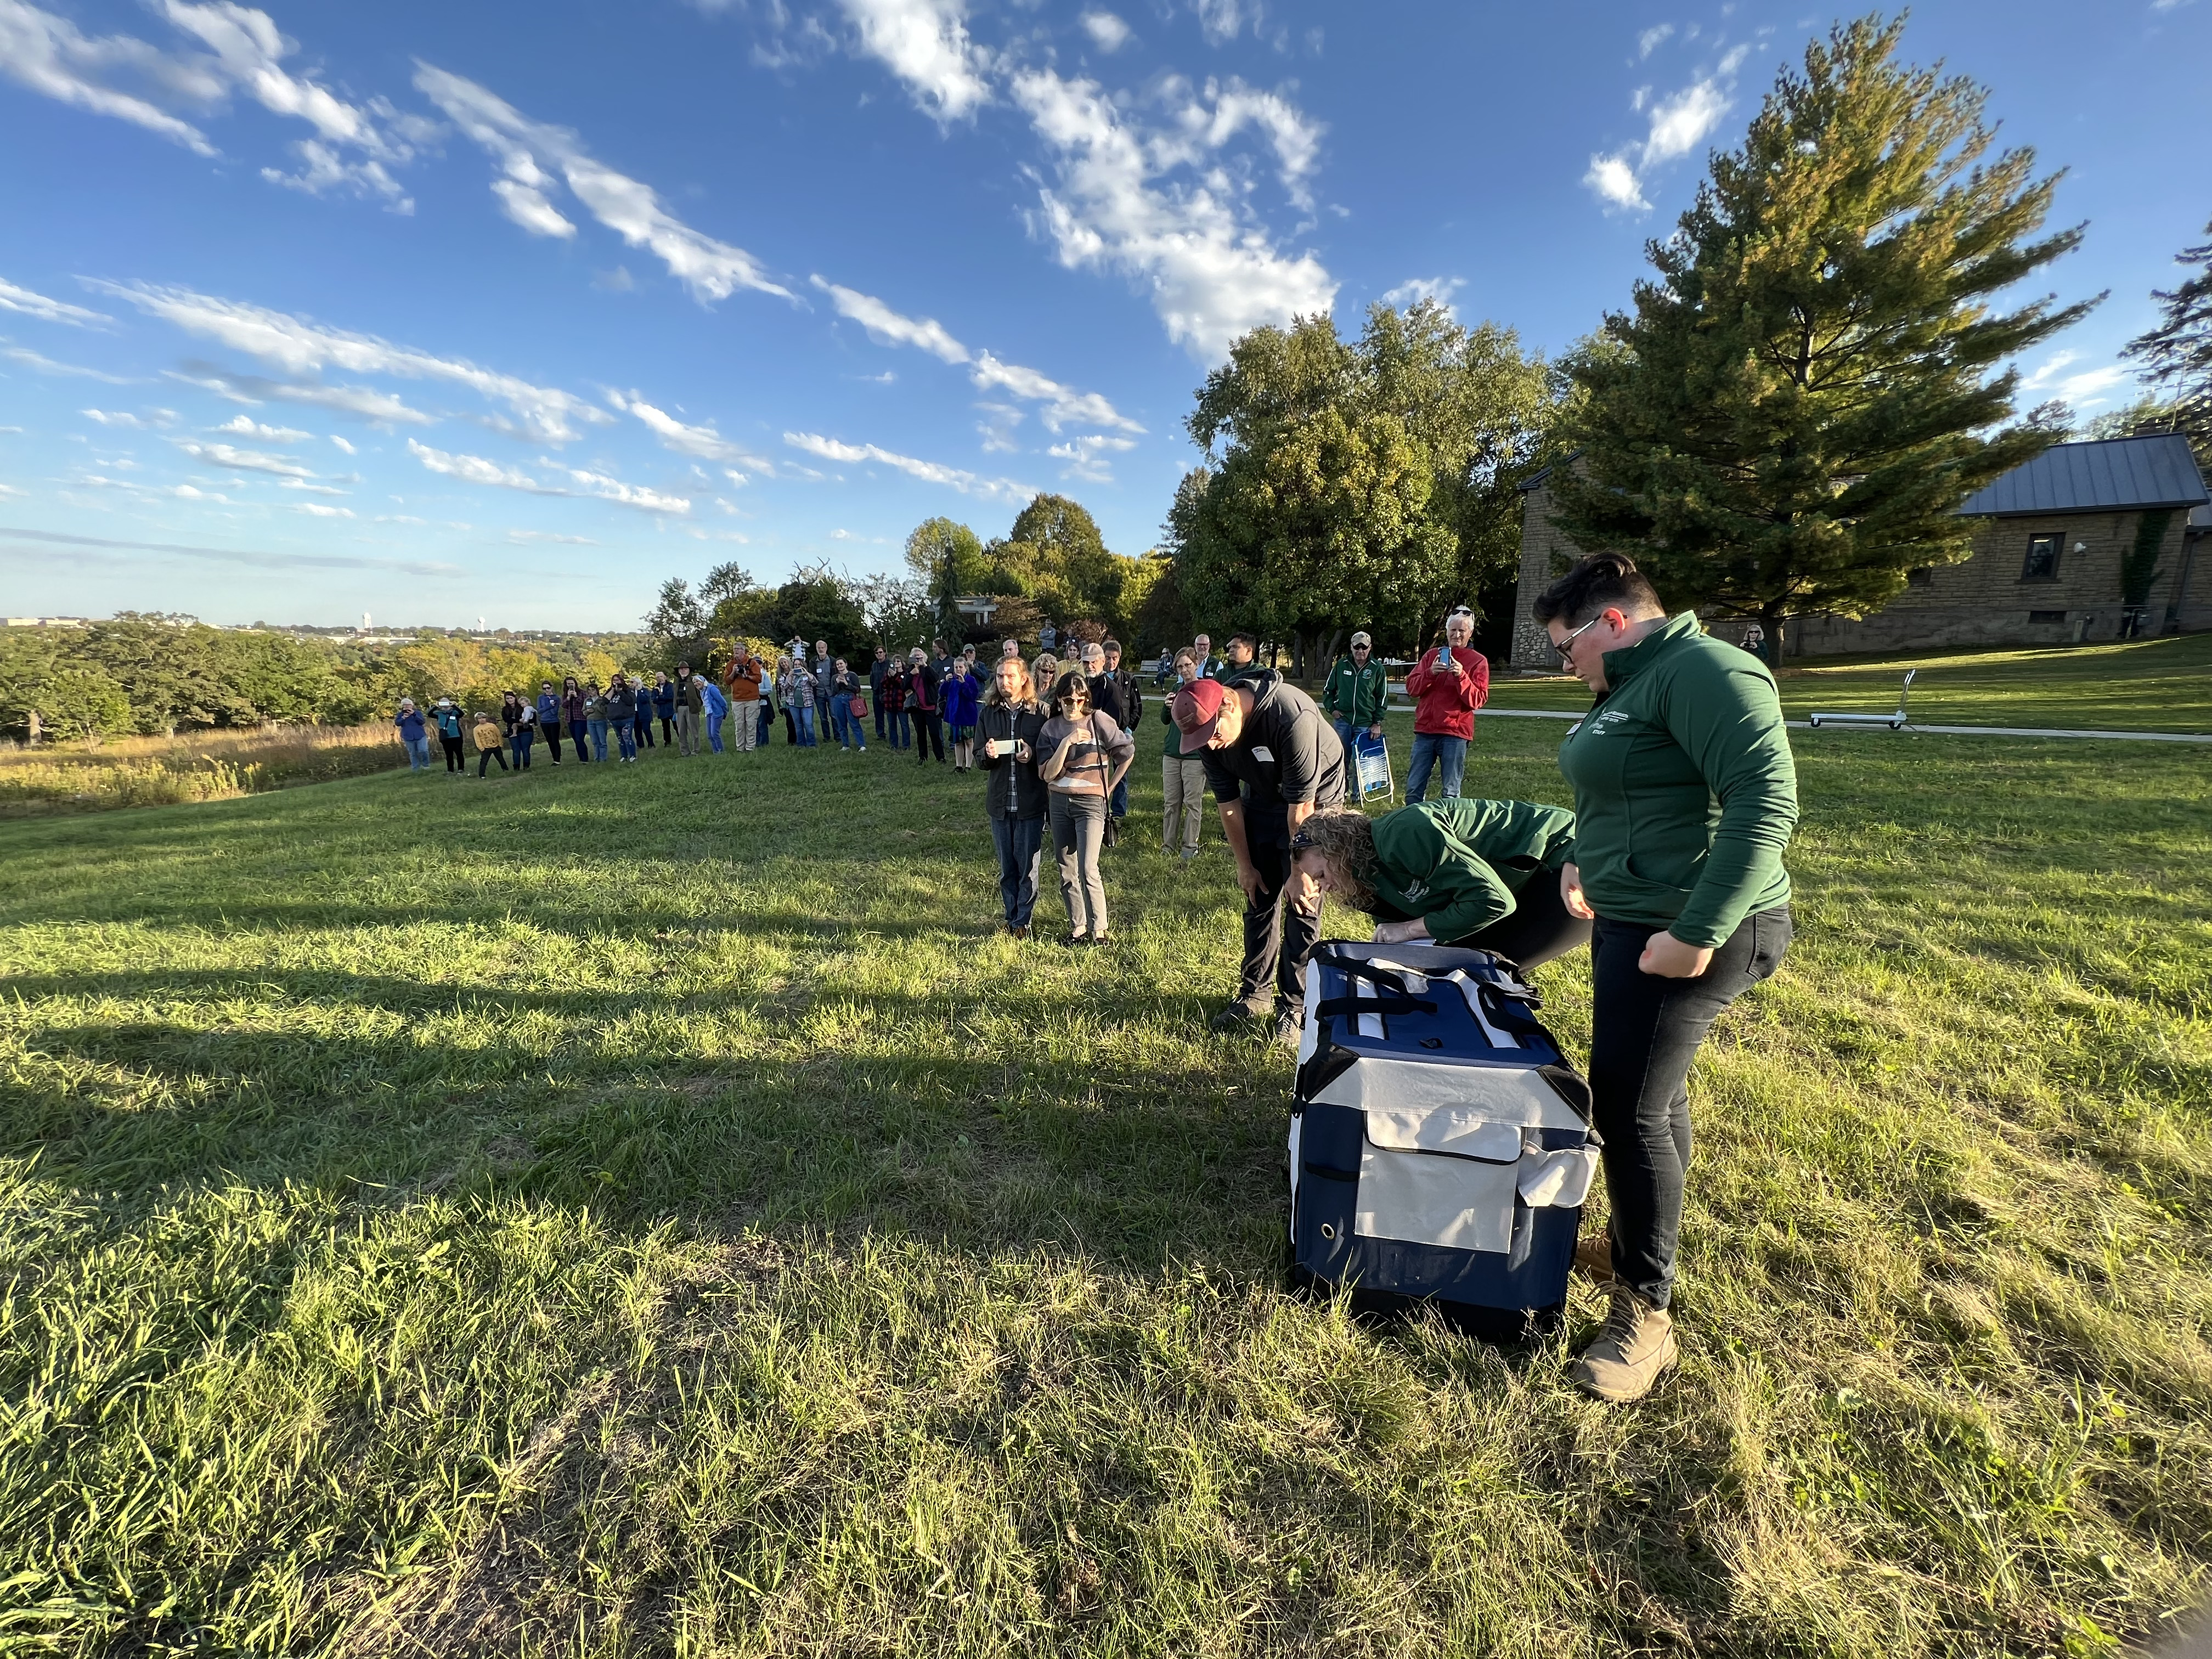 Staff and volunteers prepare to release a bald eagle